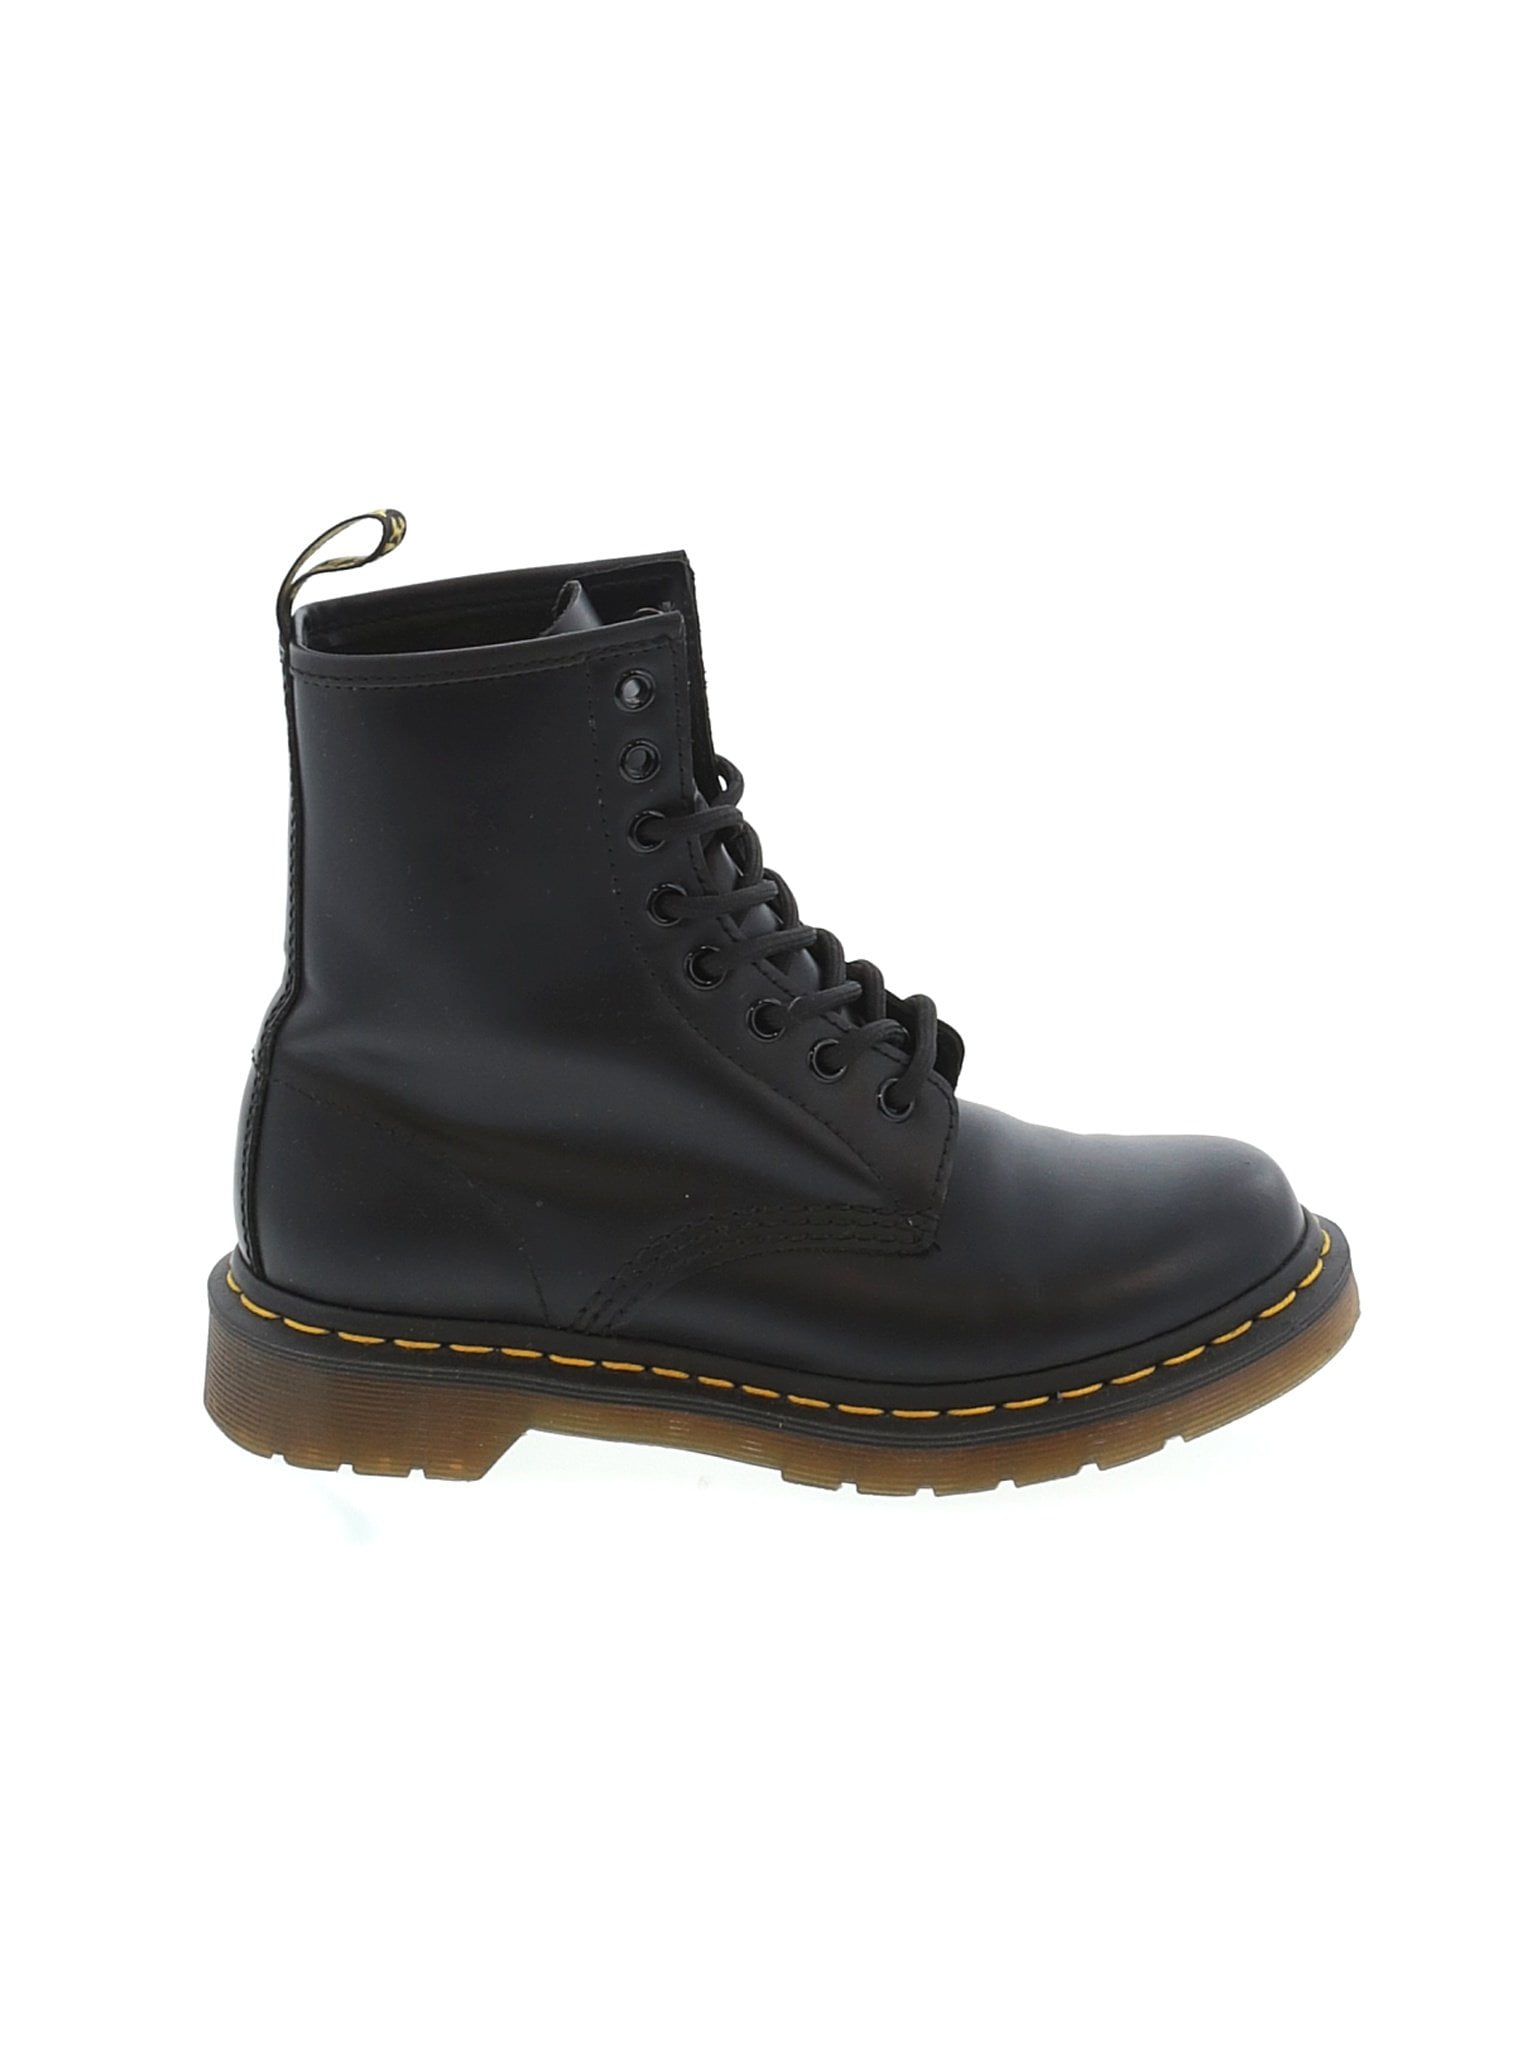 pre owned dr martens